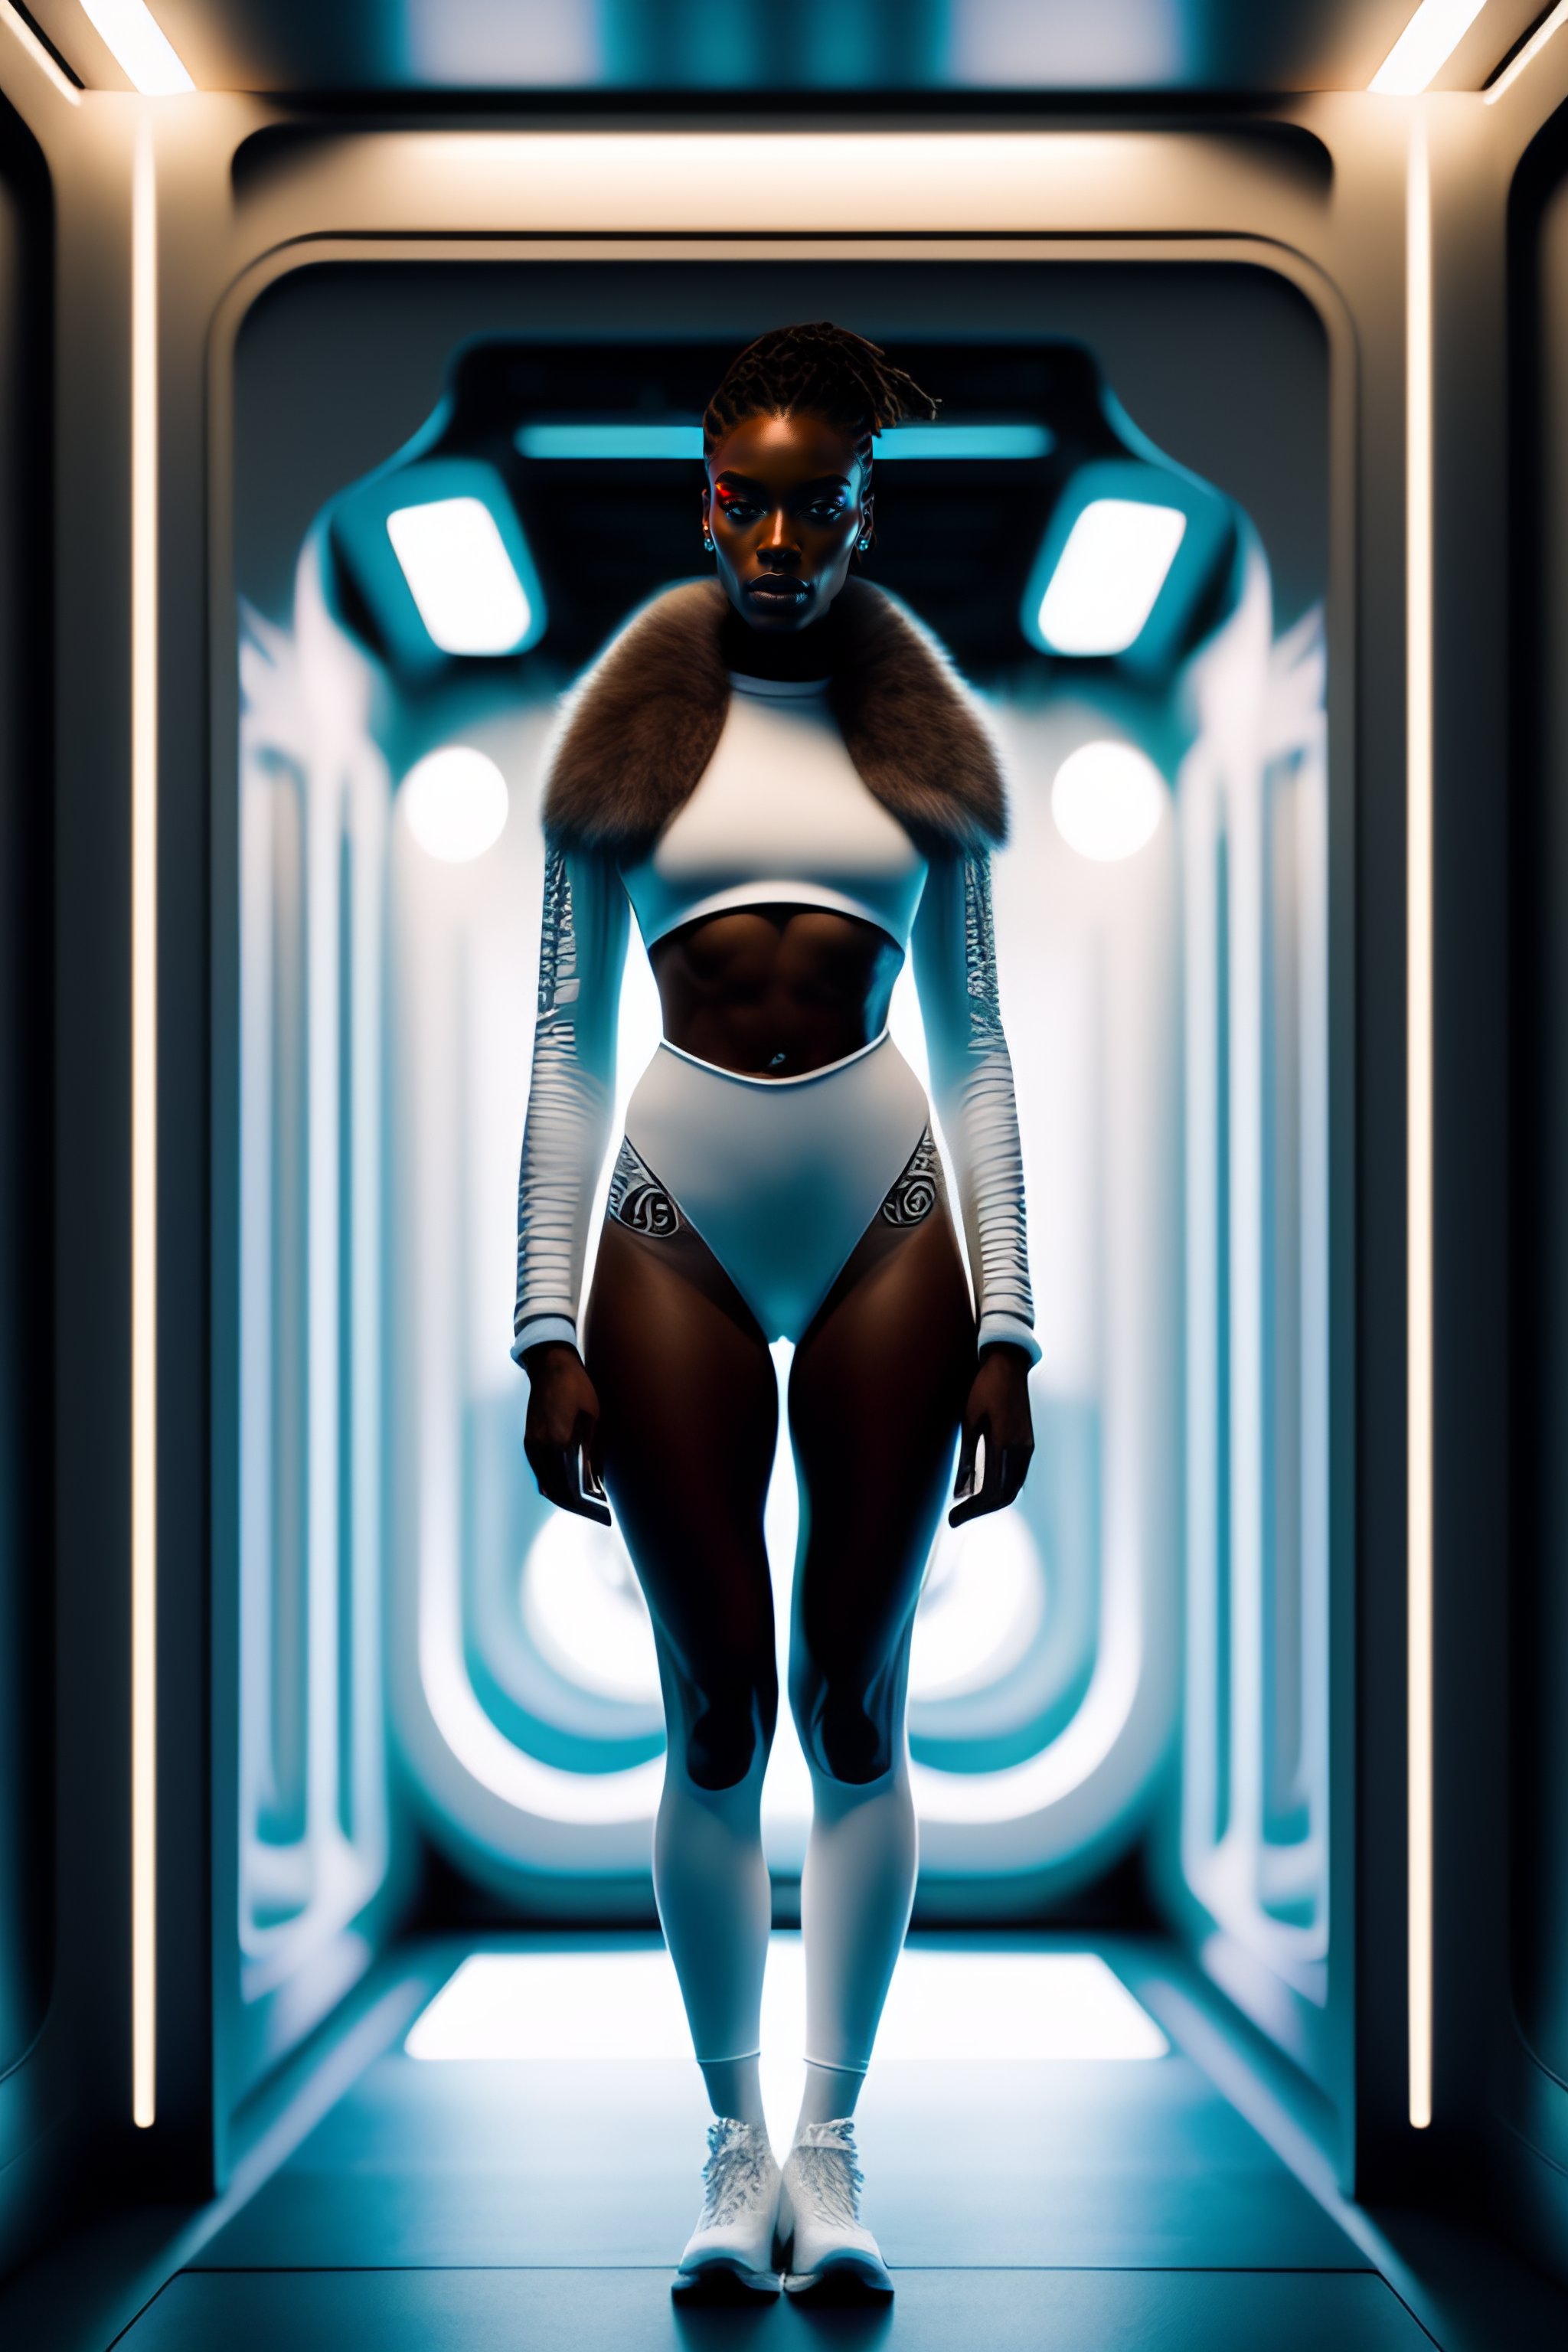 Lexica - Female standing pose trapped in a small space station